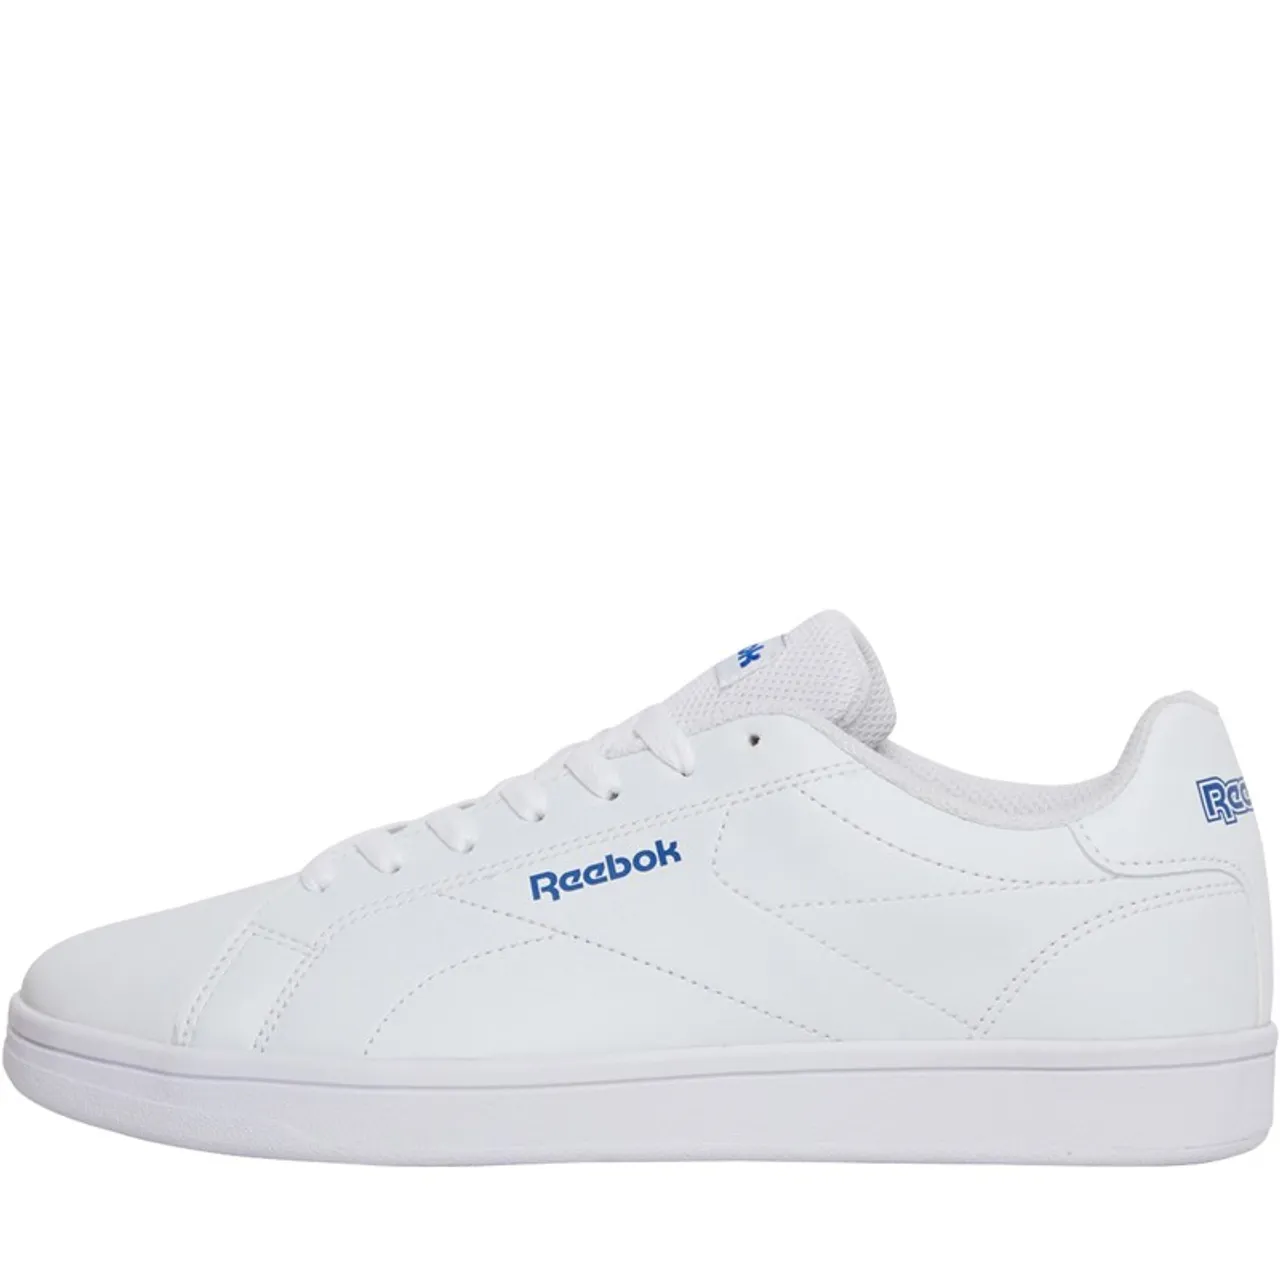 Reebok Classics Mens Reebok Royal Complete Clean 2.0 Trainers White/White/Vector Blue